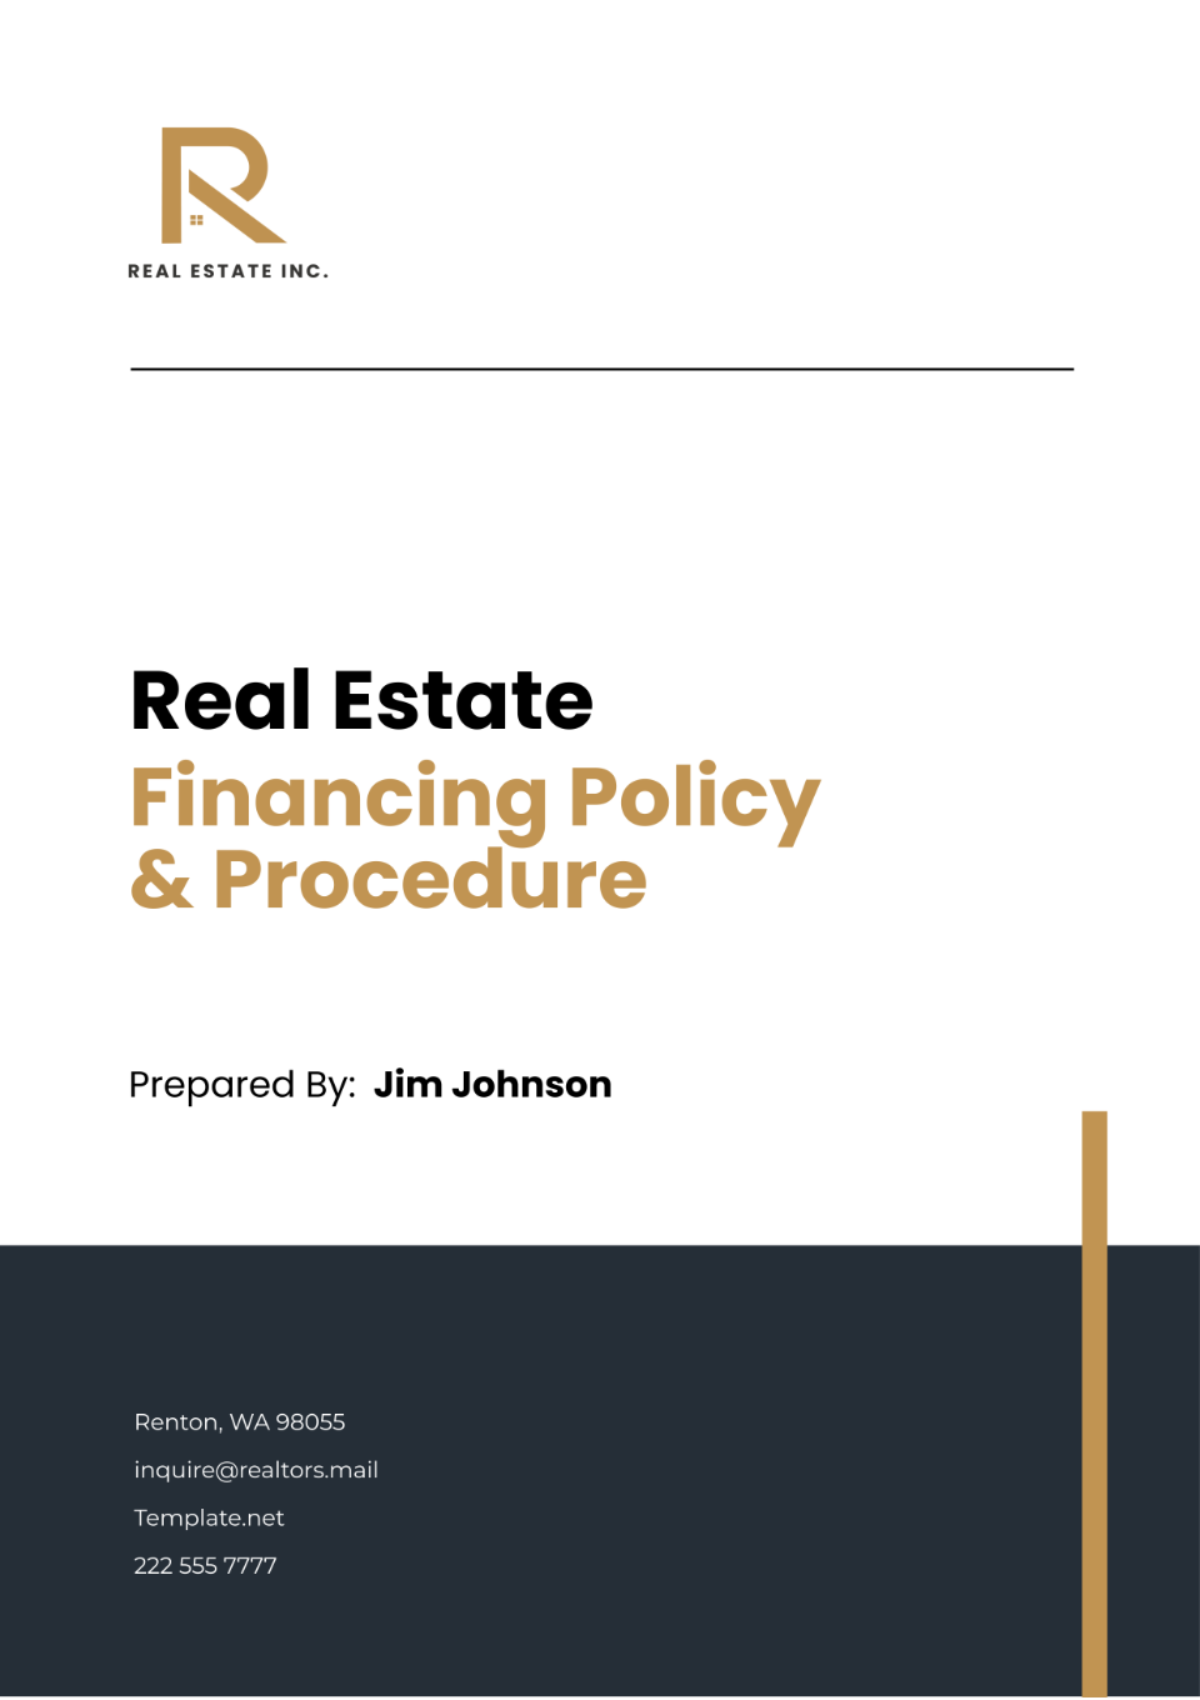 Free Real Estate Financing Policy & Procedure Template